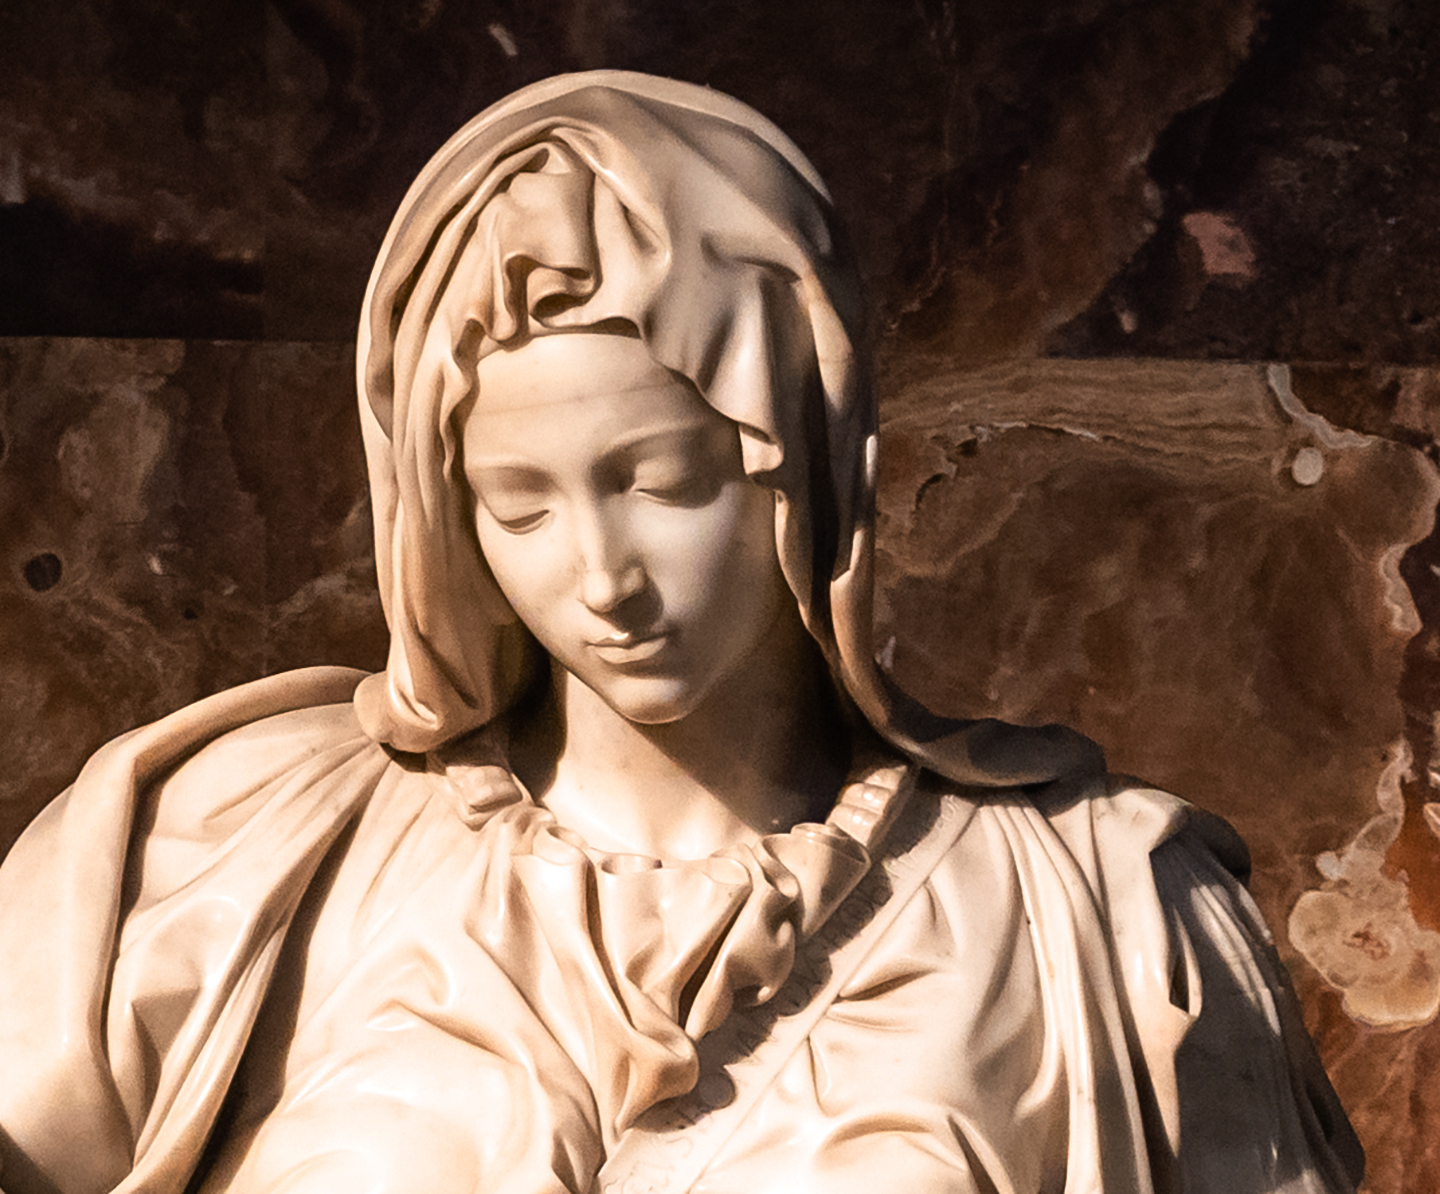 Detail of Mary from Michelangelo's "Pietà." (PhotoFires/Shutterstock)